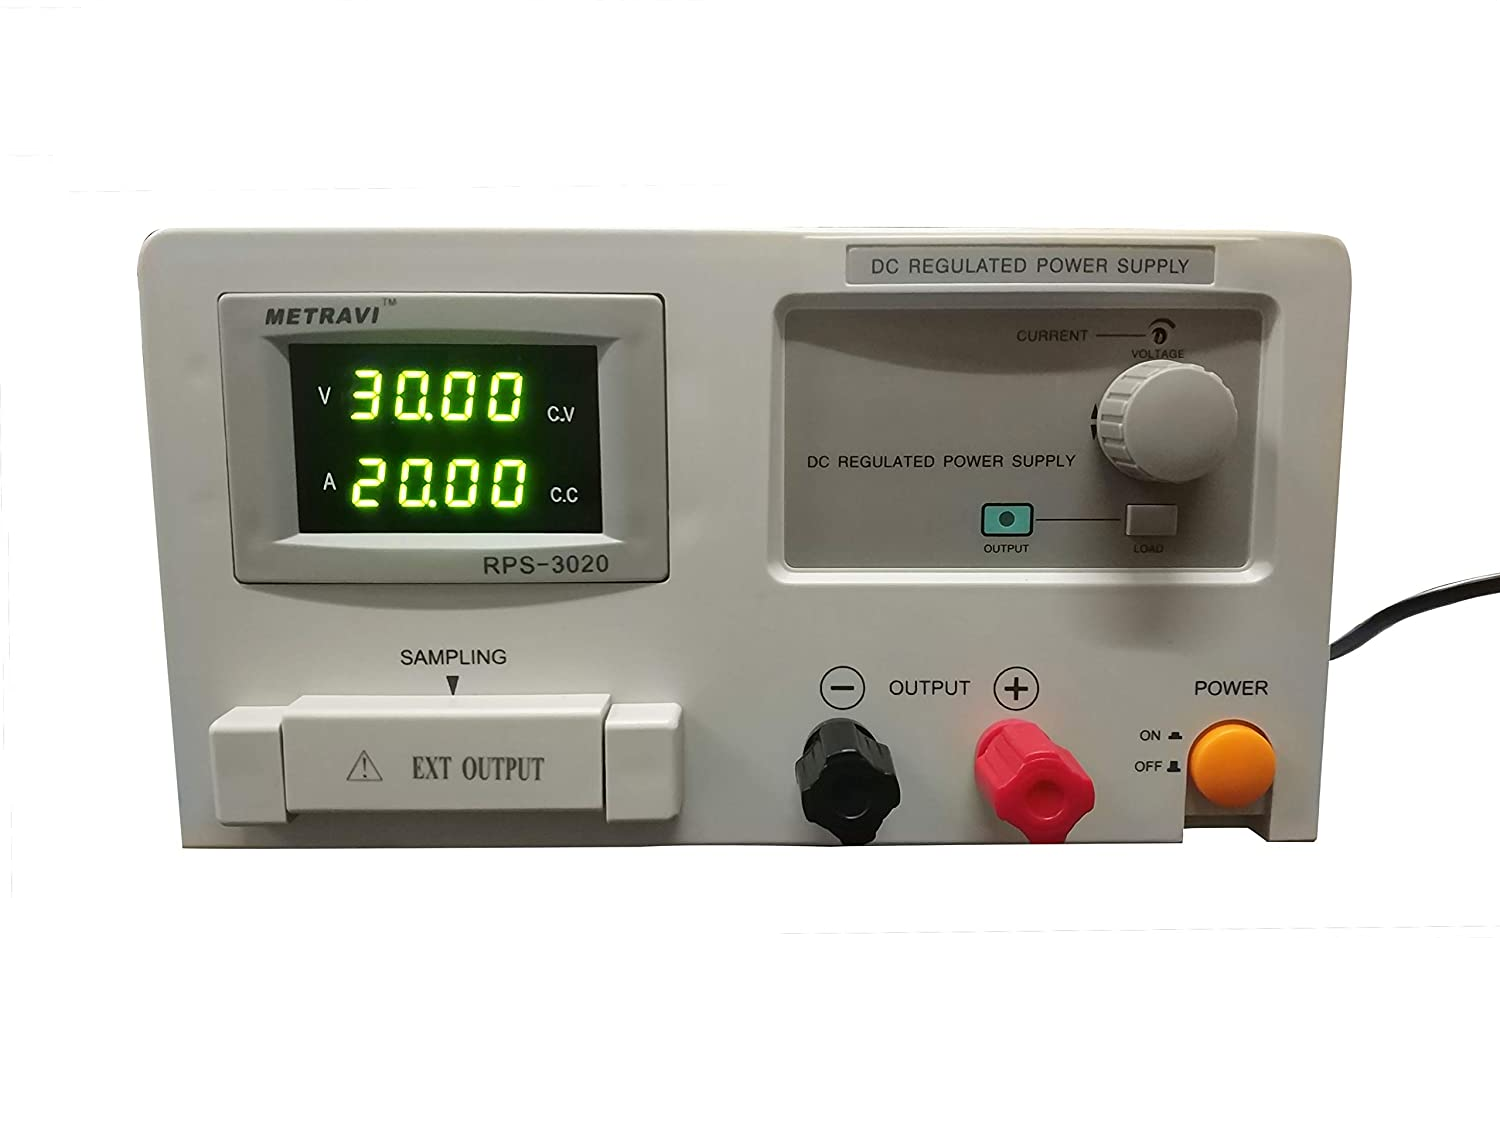 Metravi RPS-3020 DC Regulated Power Supply - Single Output with LED Display of Variable 0-30V / 0-20A DC